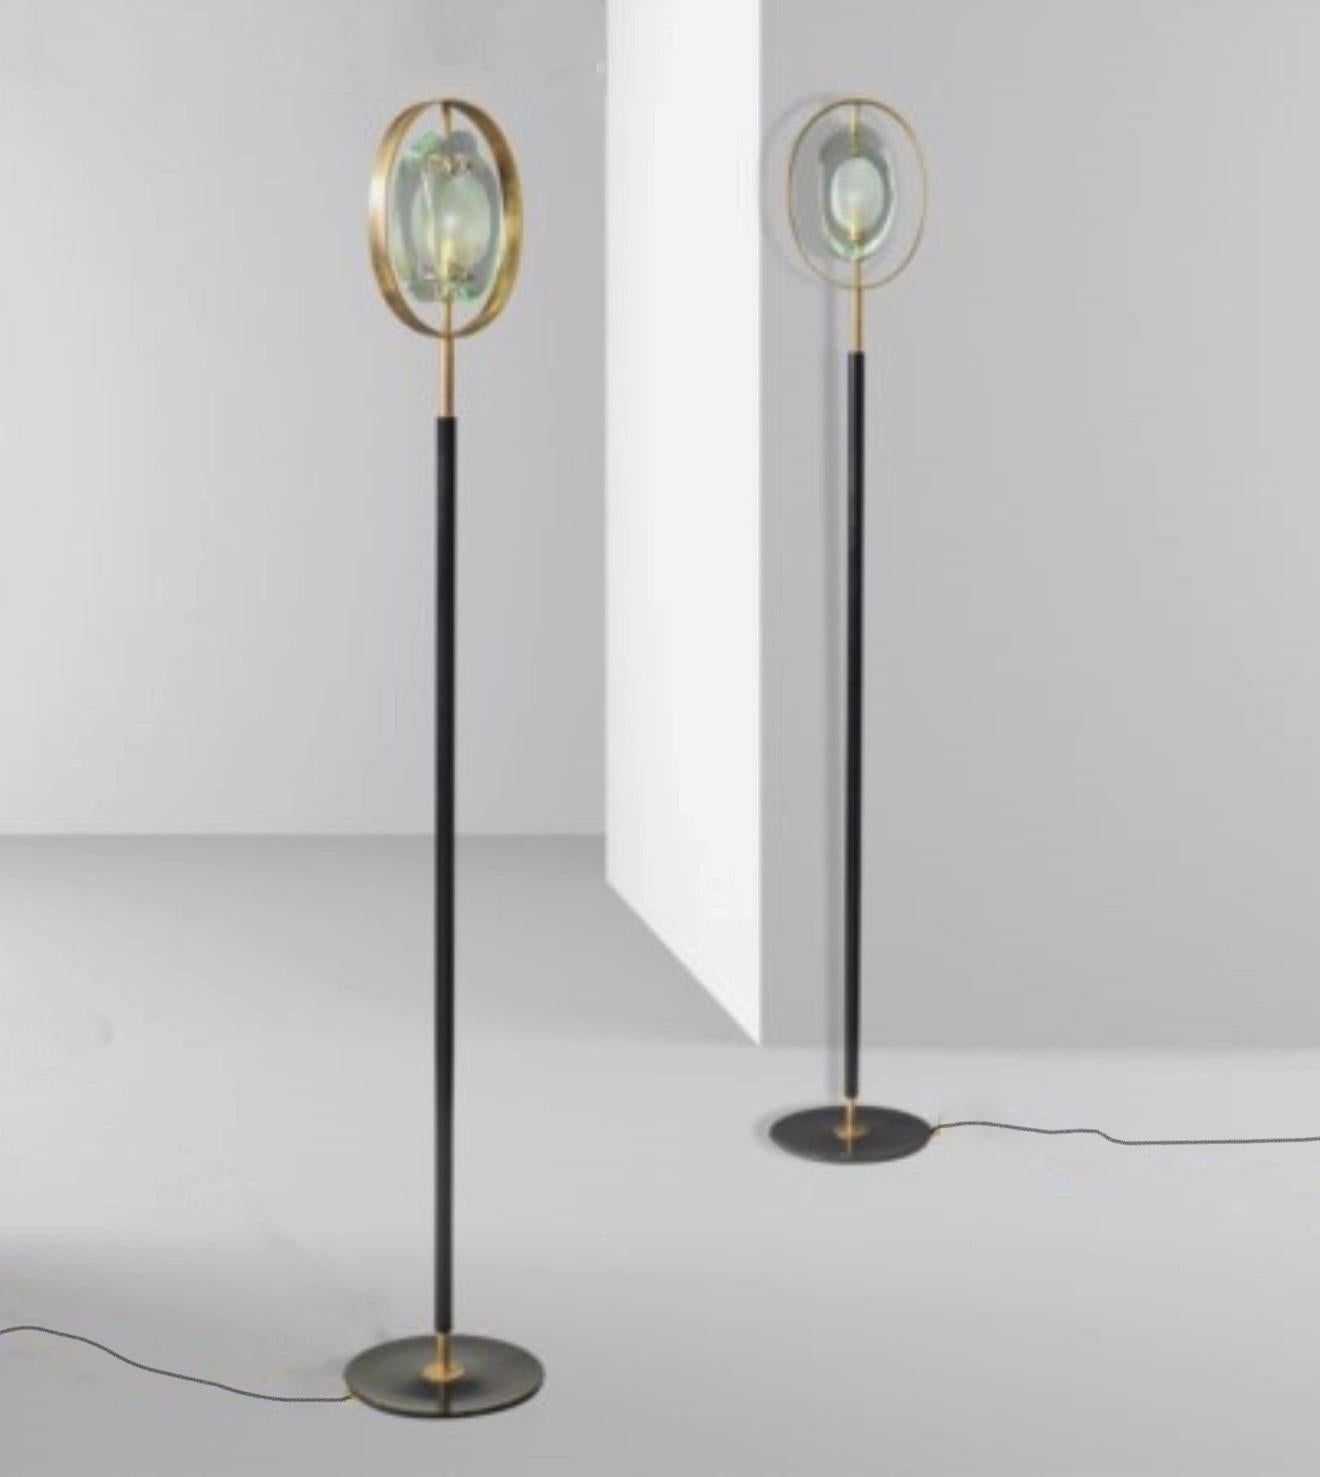 Mid-Century Modern Pair of Floor Lamps by Max Ingrand for Fontana Arte Model 2020, Italy, 1961